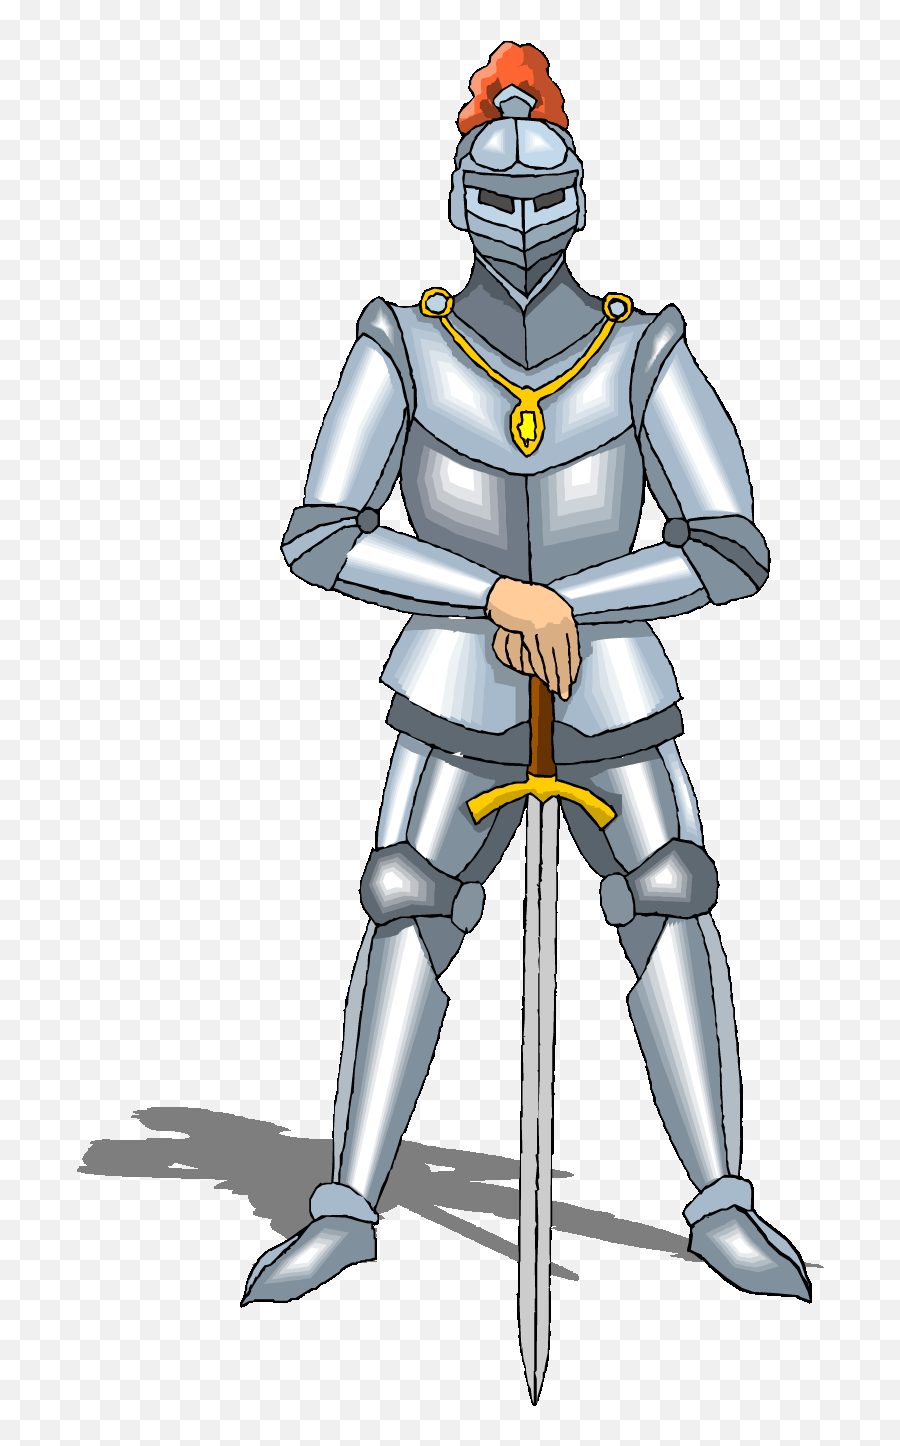 Knight Clipart Medieval Army Knight - Medieval Knight Clipart Emoji,Knight Clipart